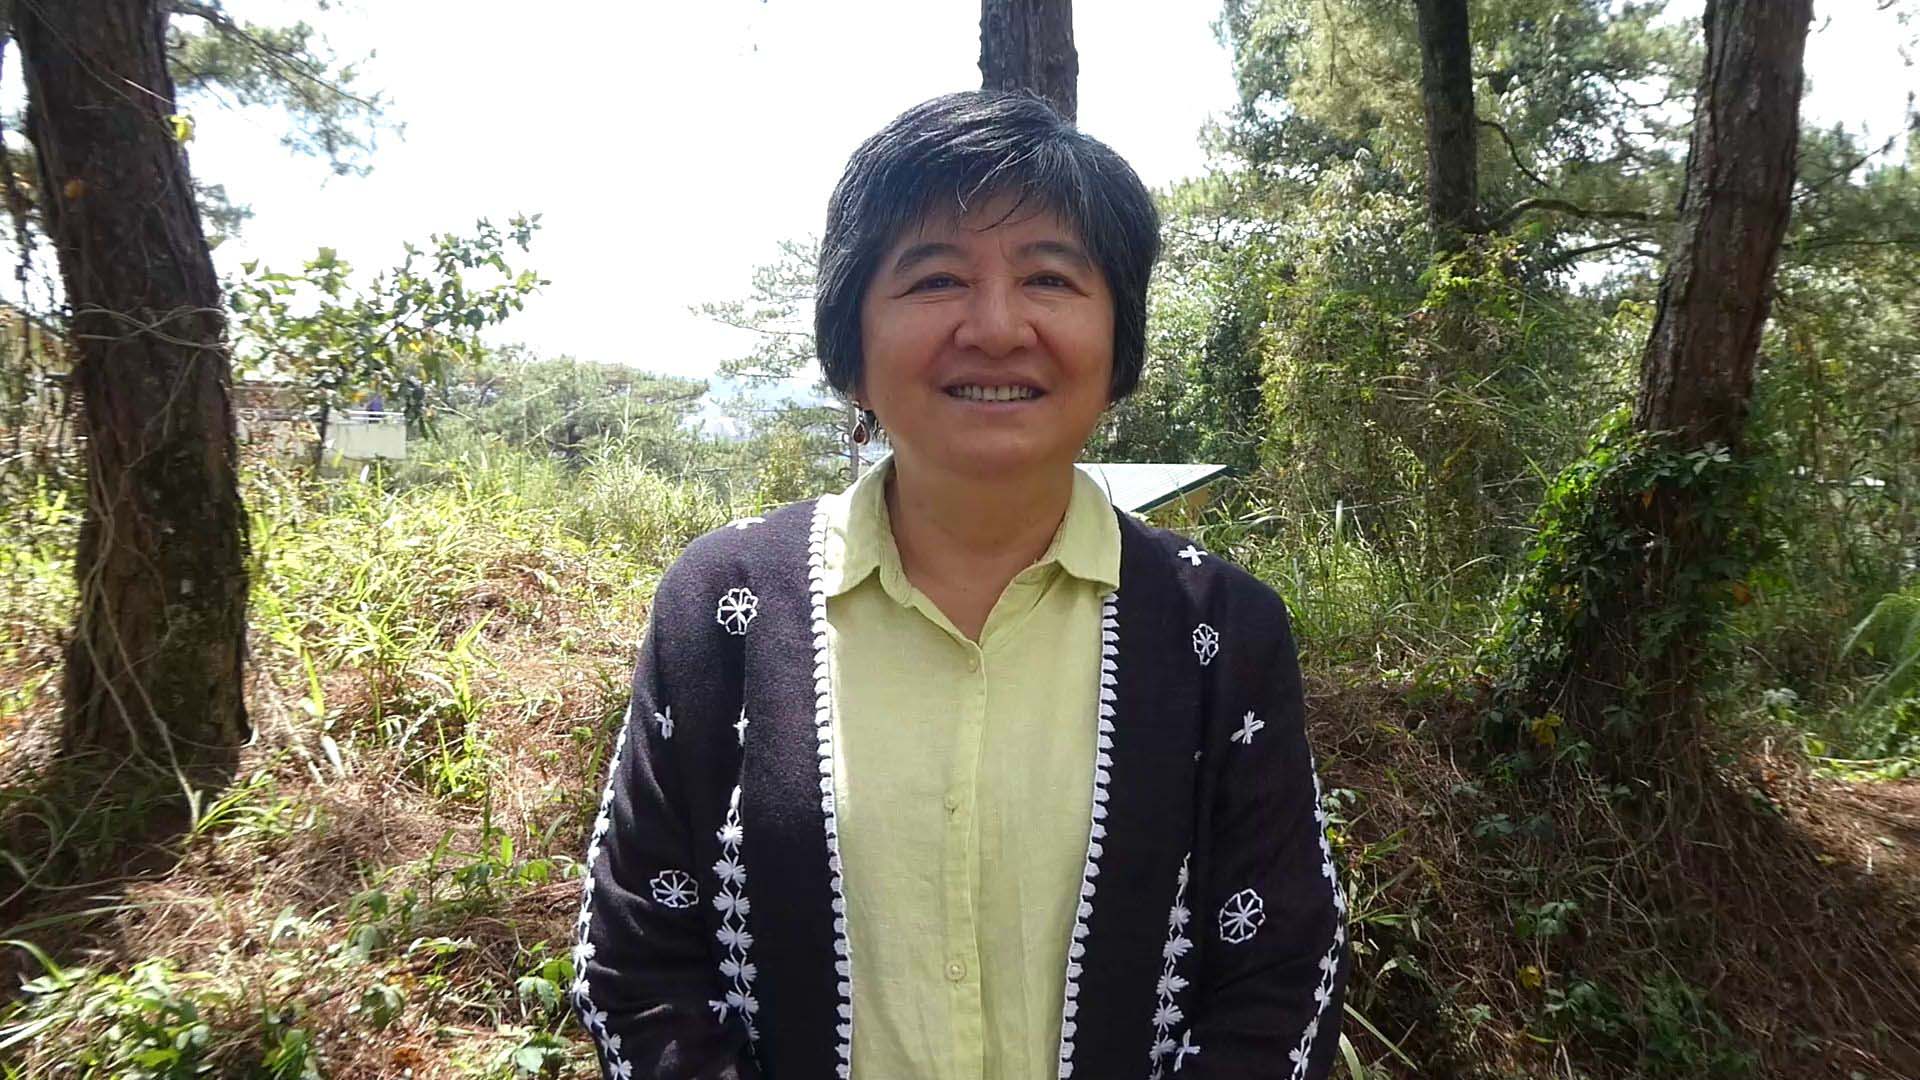 Message from Joan Carling on the International Women’s Day